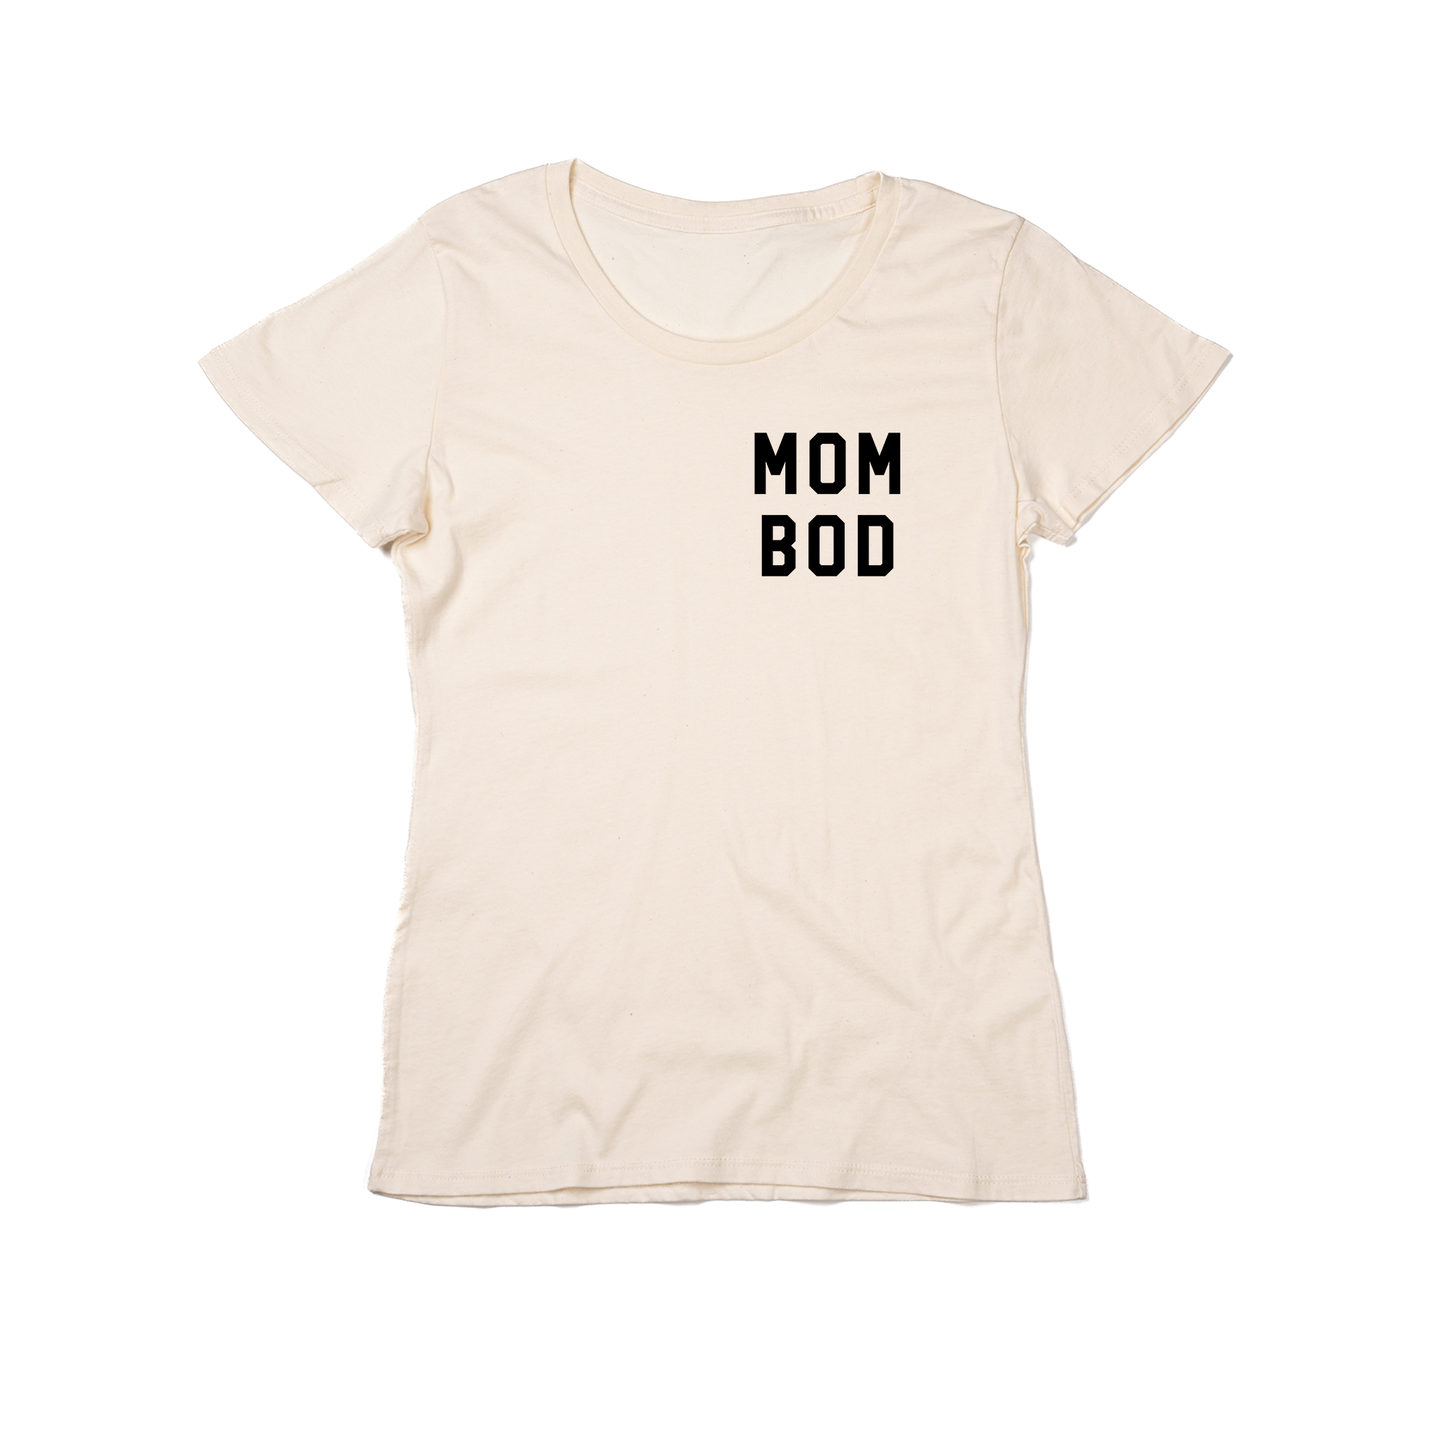 Mom Bod (Pocket, Black) - Women's Fitted Tee (Natural)